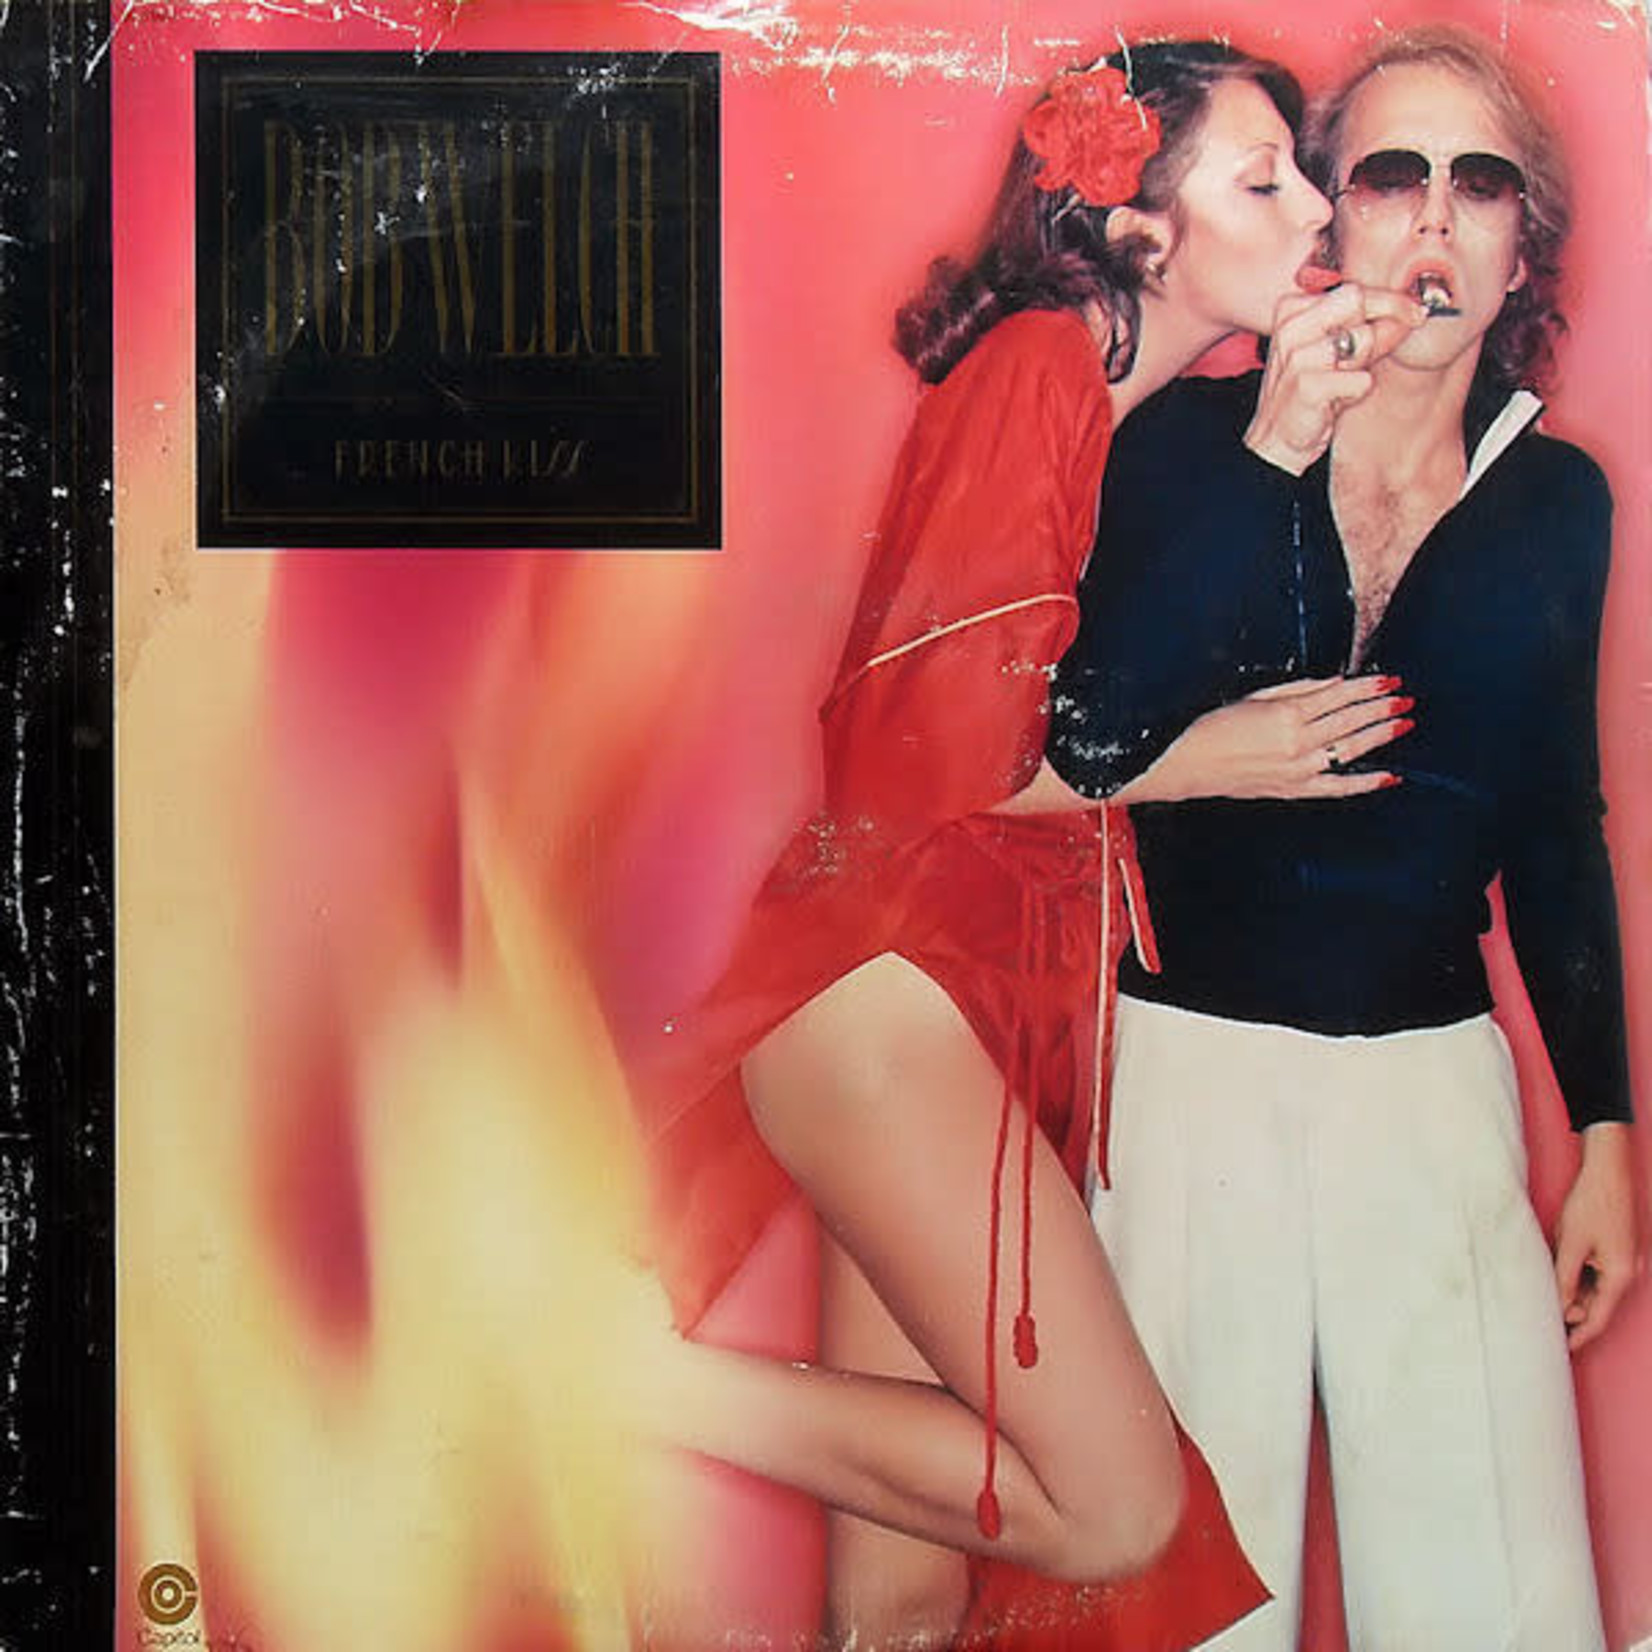 Bob welch Bob Welch – French Kiss (VG, 1977, LP, Capitol Records – ST-11663, Canada)